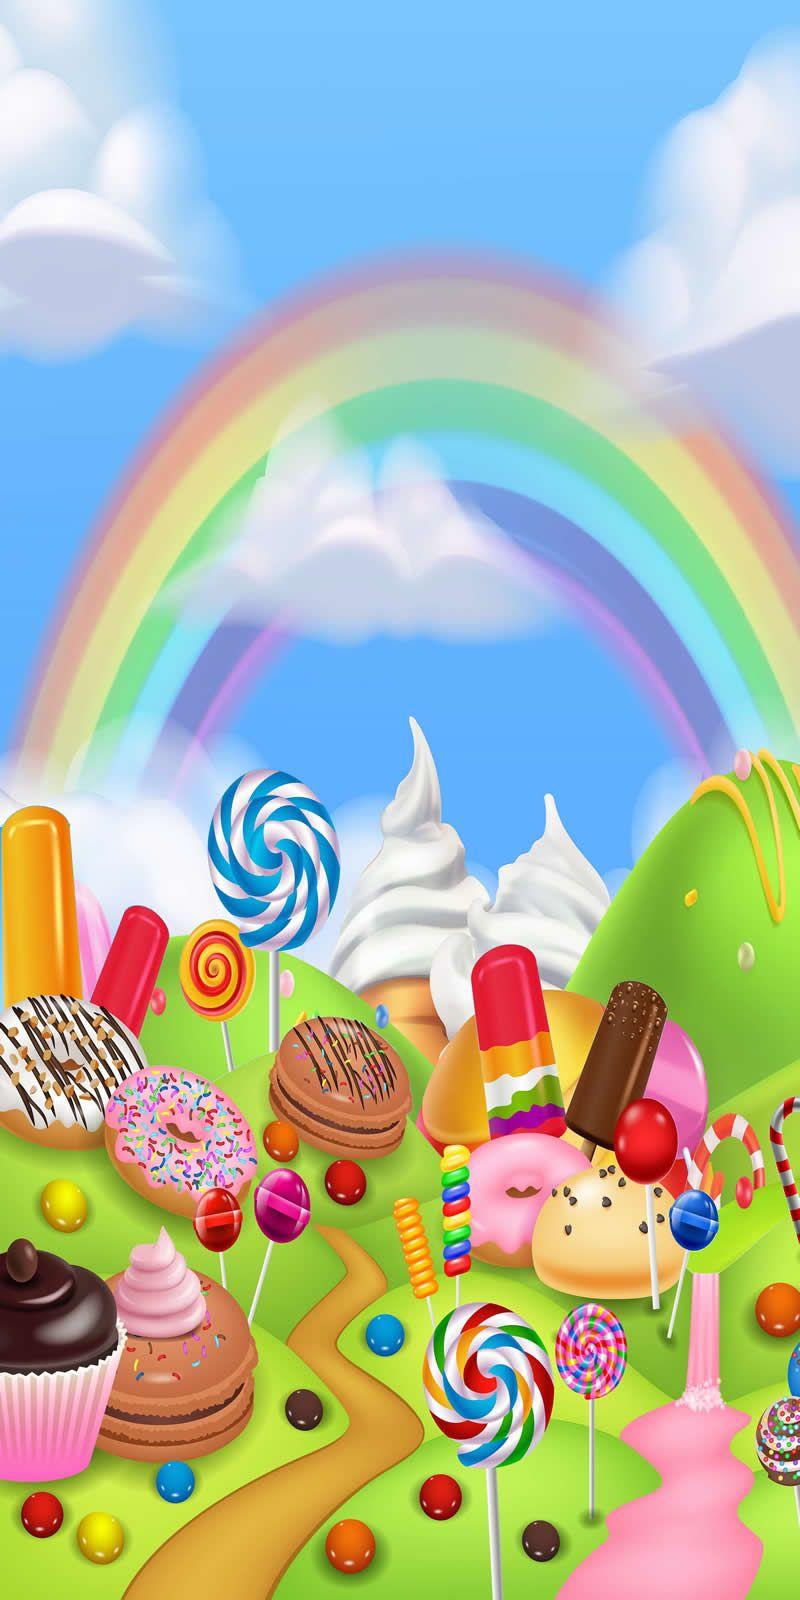 Candy Land Pictures  Download Free Images on Unsplash